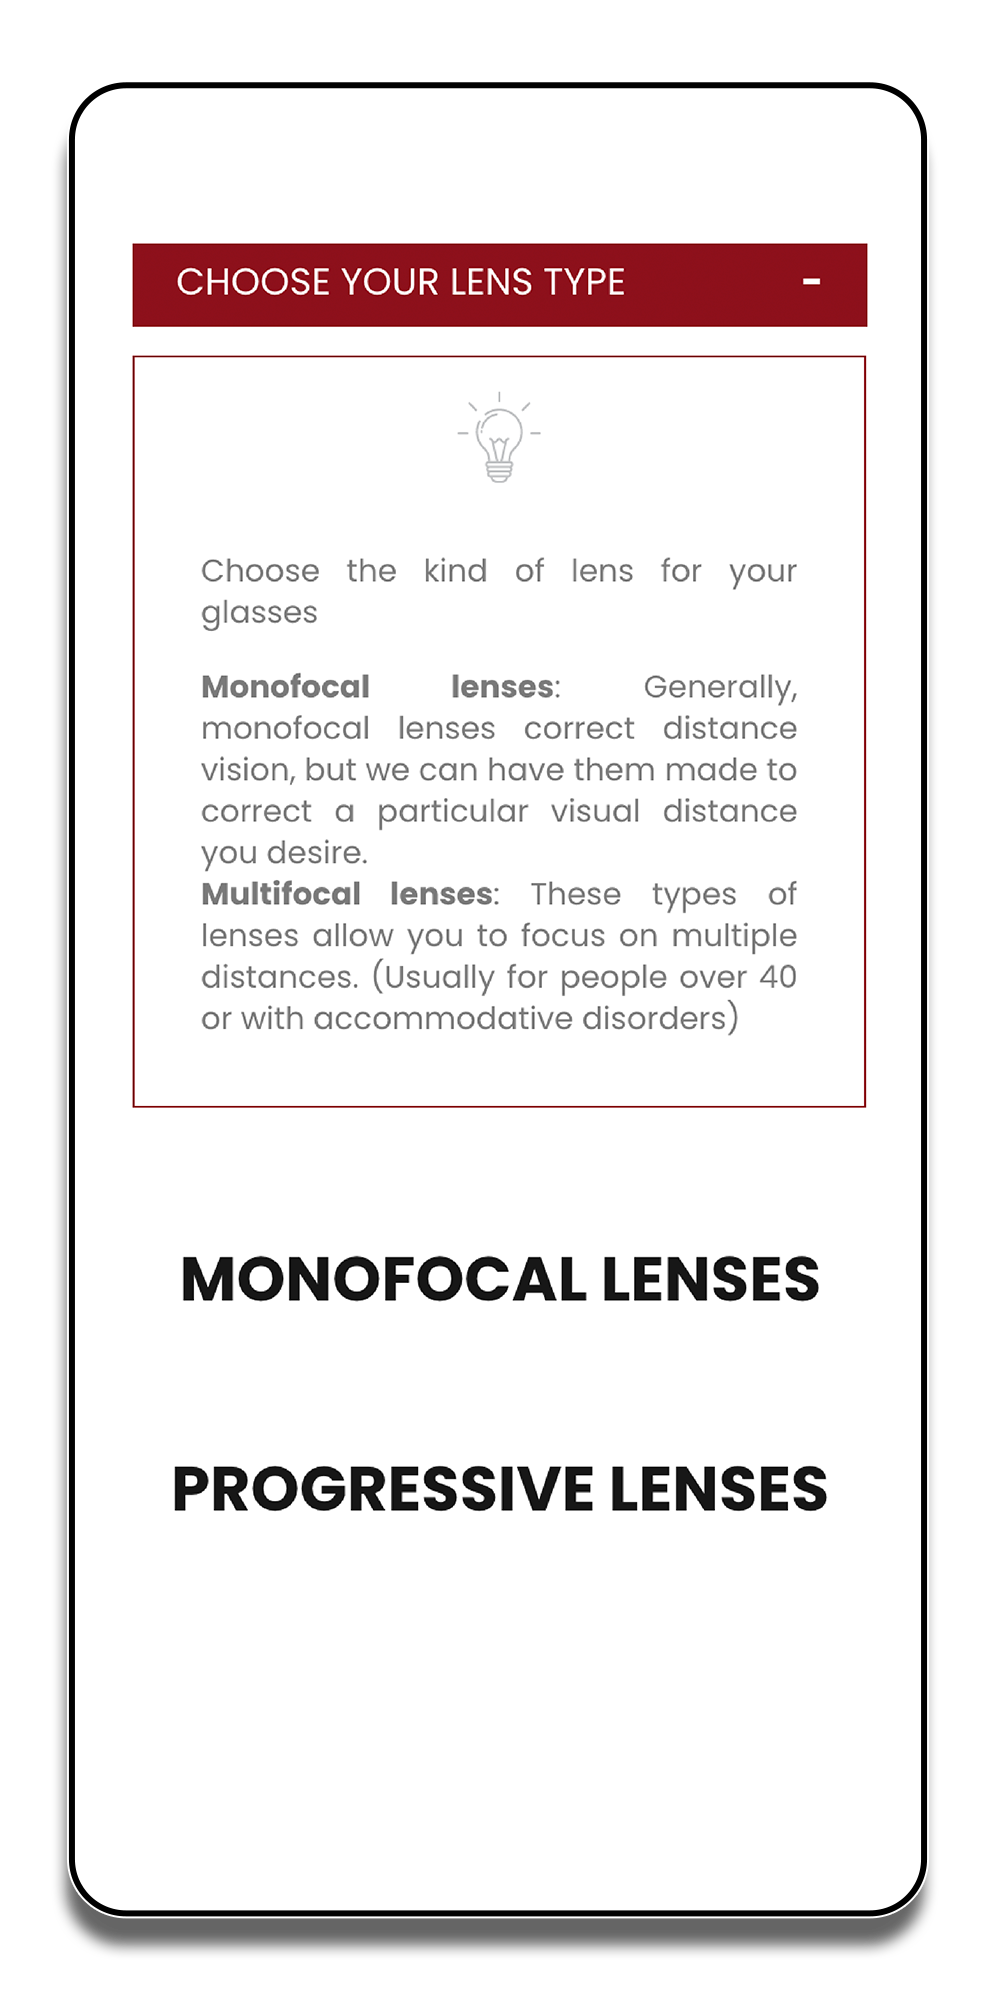 Choose the type of lens